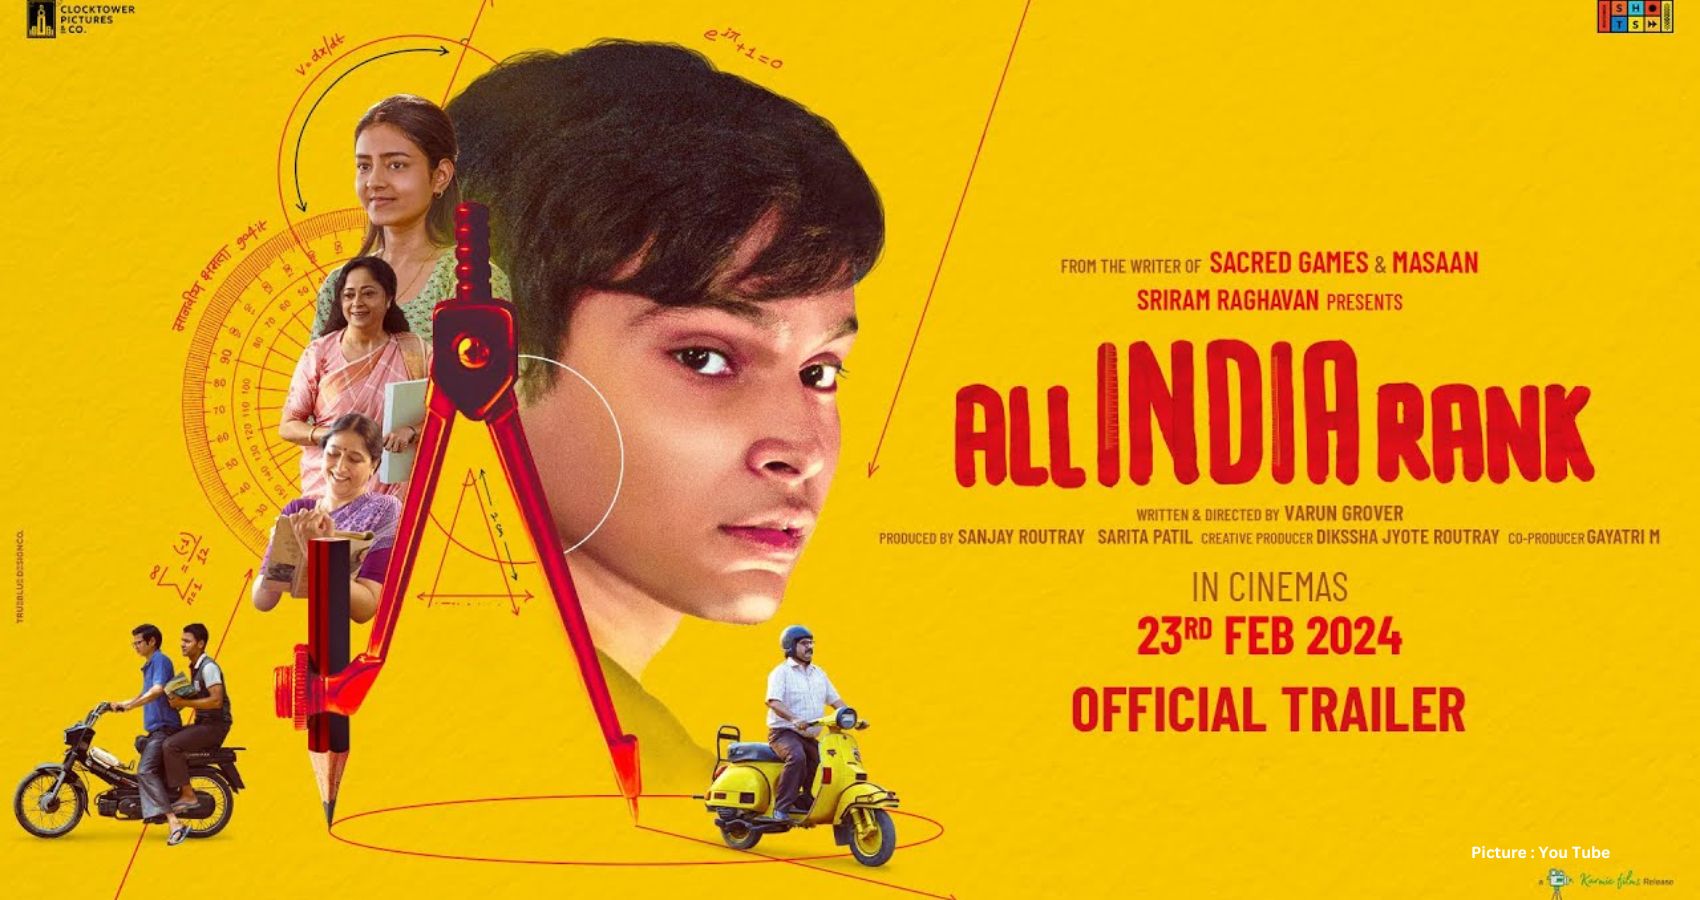 Featured & Cover All India Rank Varun Grover's Directorial Debut Takes Center Stage as the First Indian Film to Close IFFR in Over 5 Decades